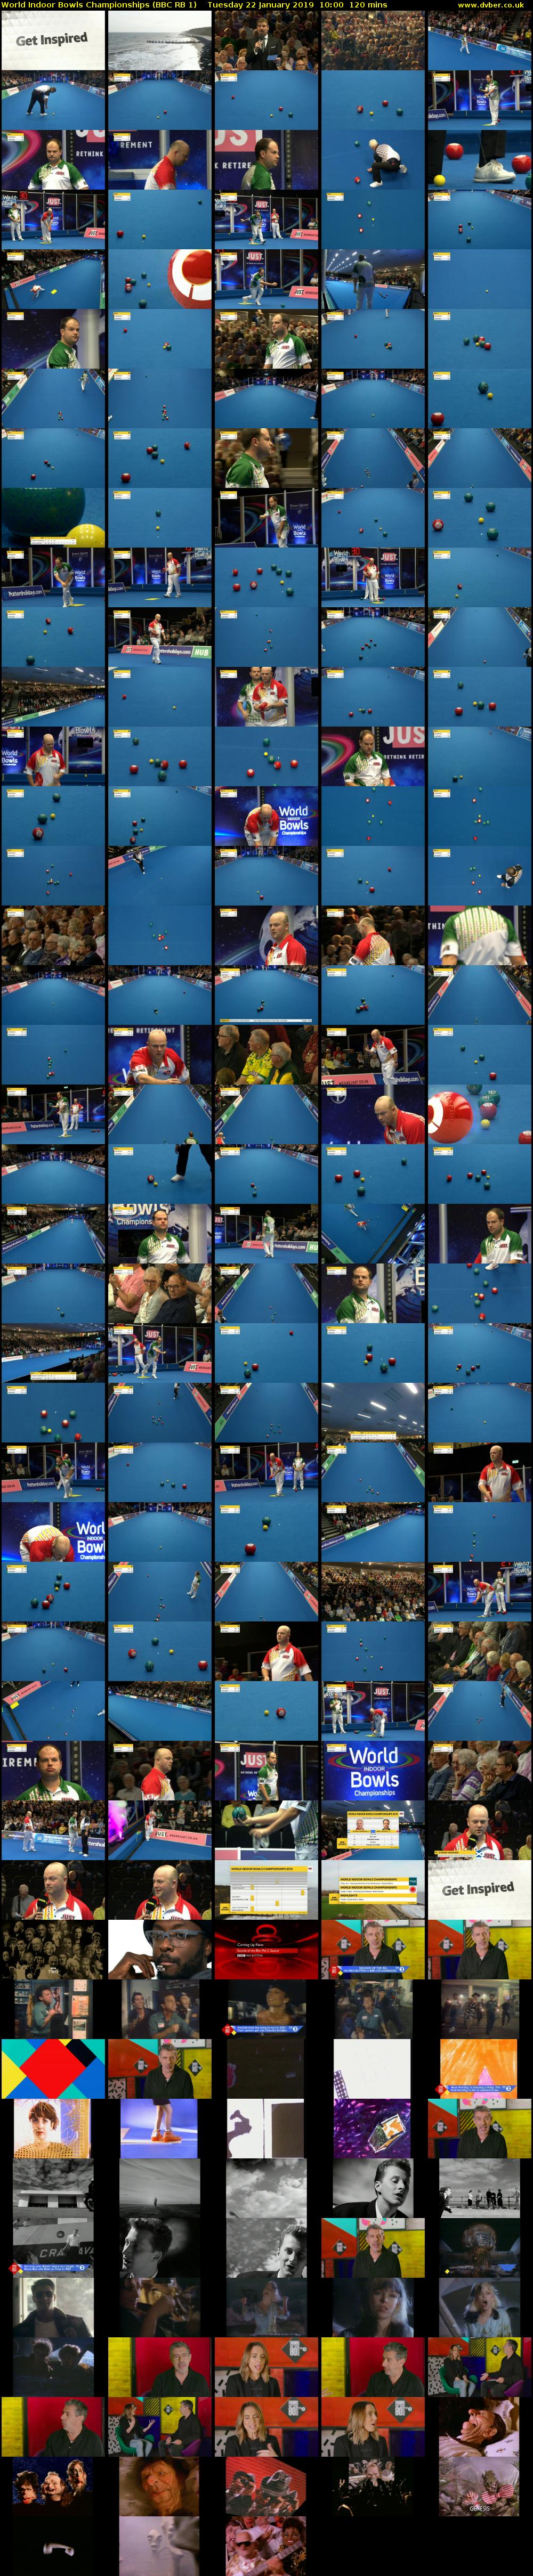 World Indoor Bowls Championships (BBC RB 1) Tuesday 22 January 2019 10:00 - 12:00